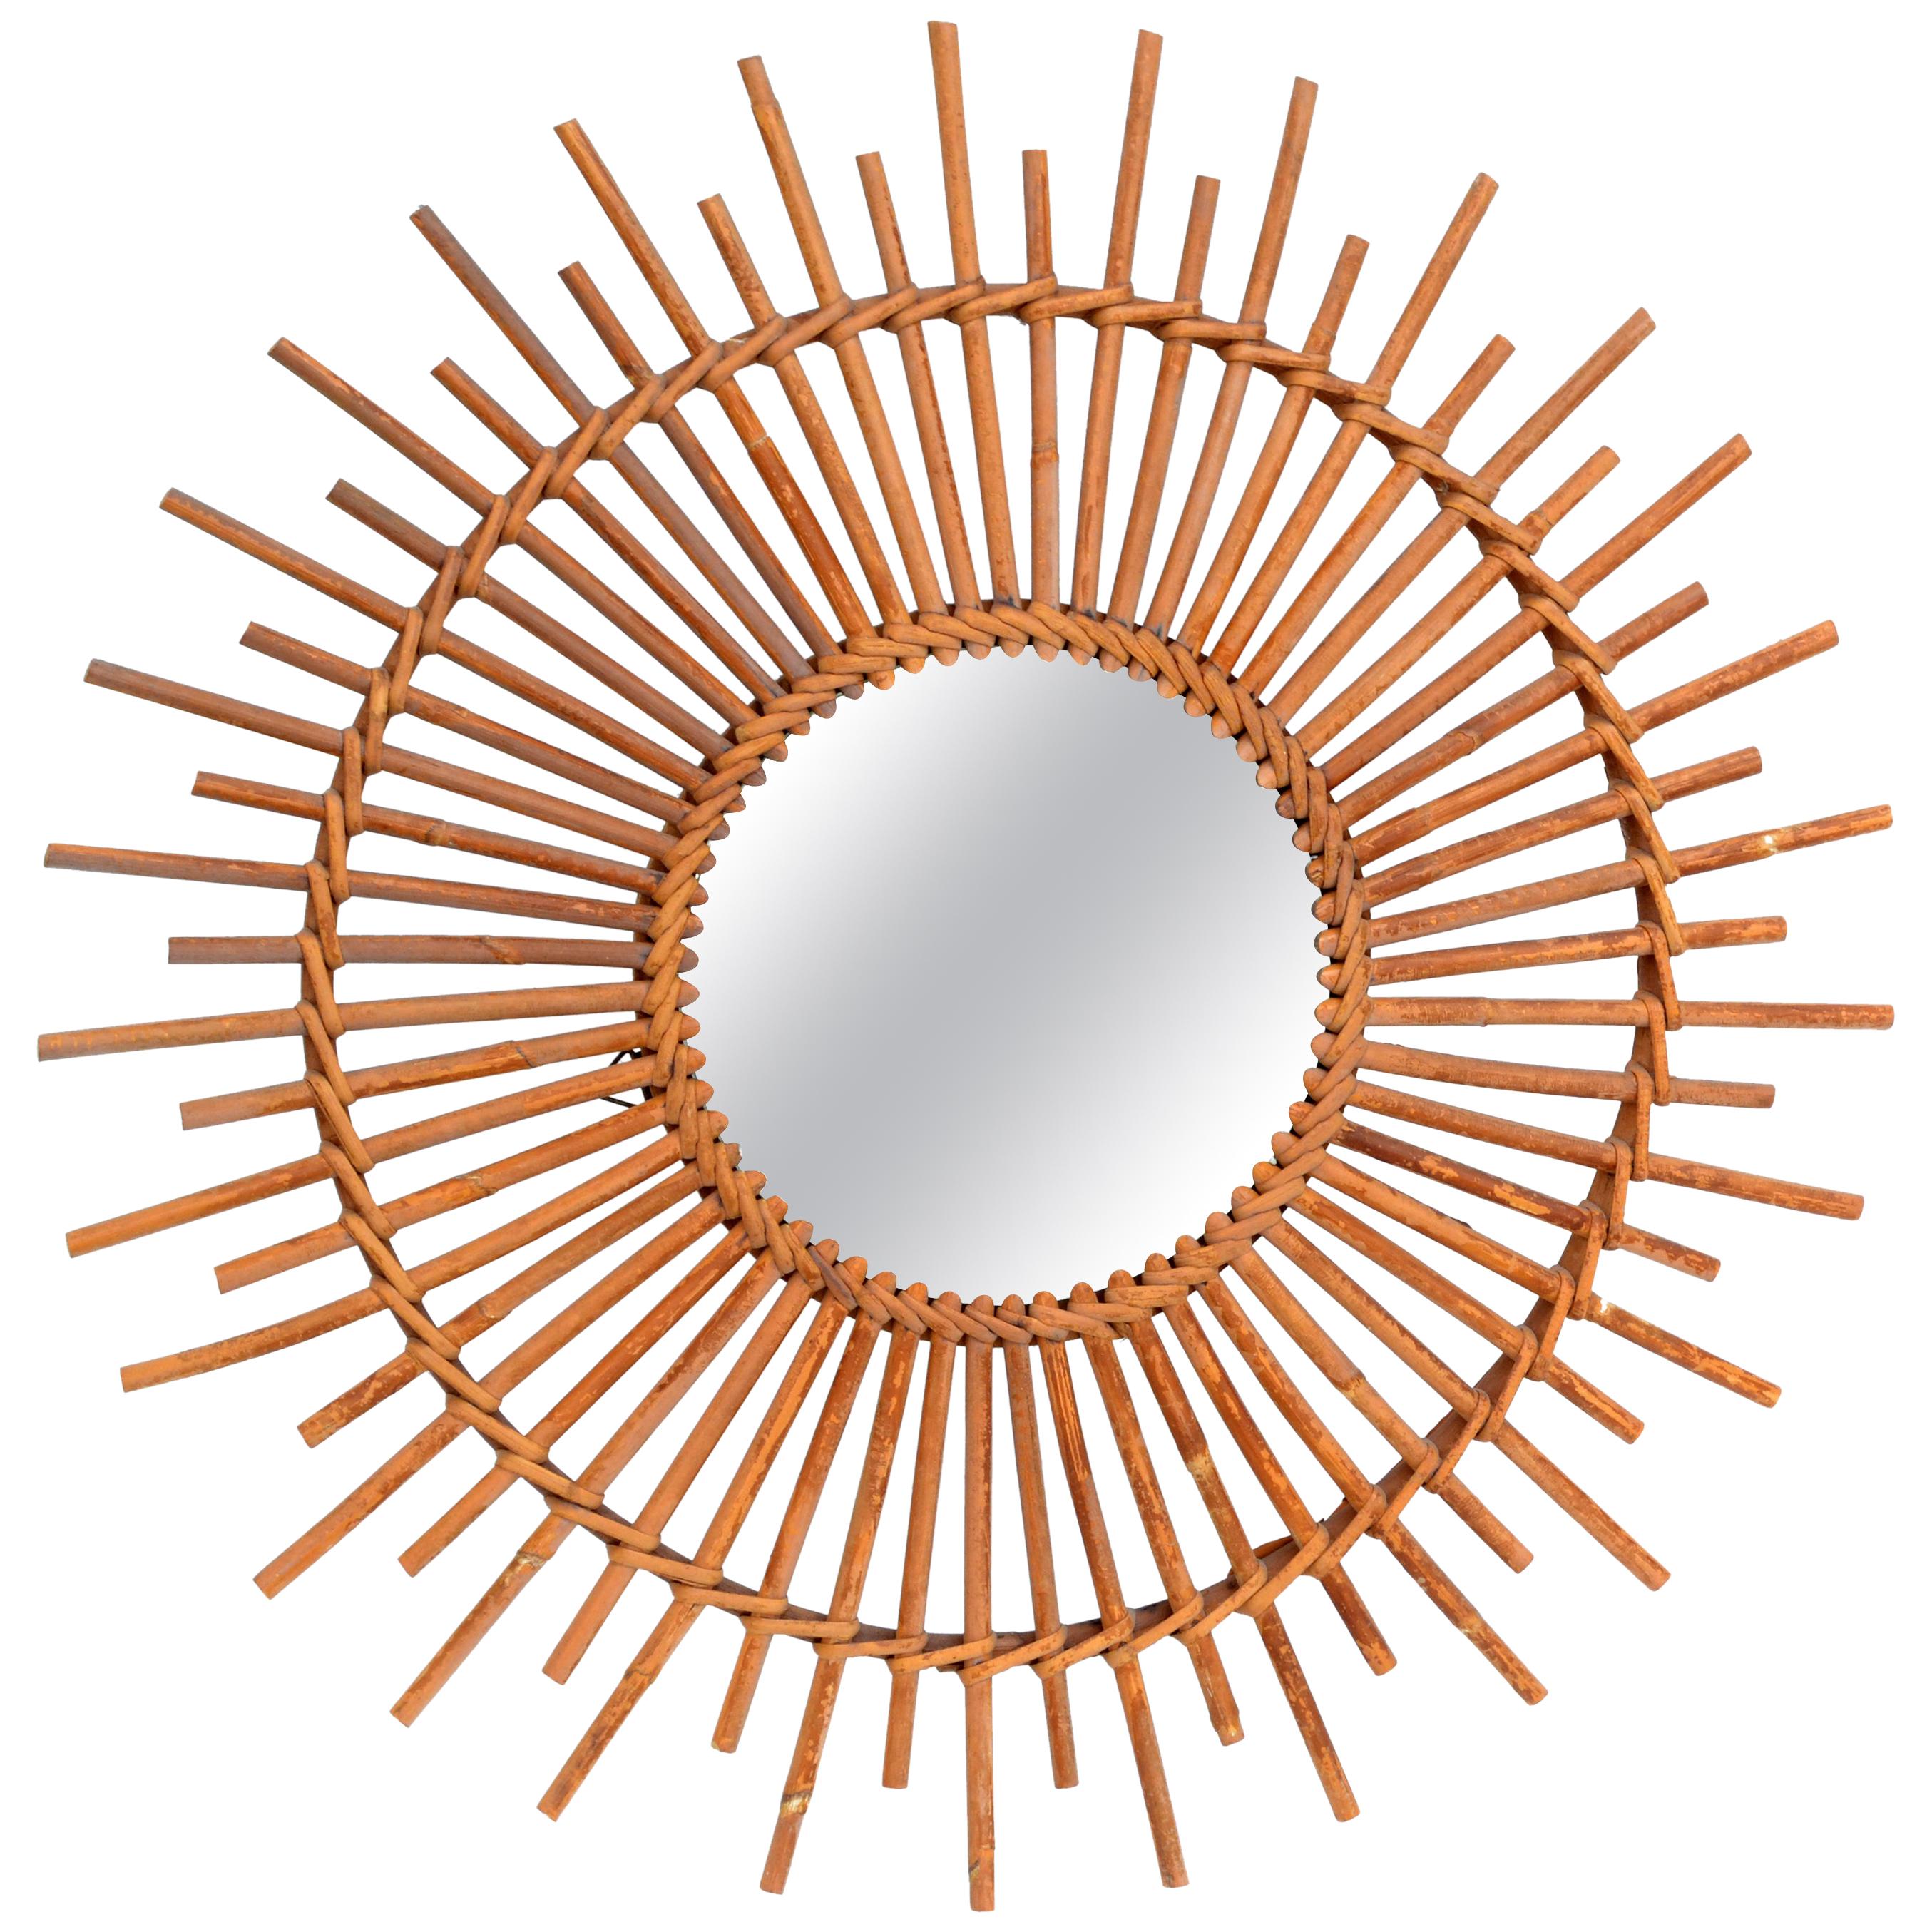 Bohemian Chic French Handcrafted Round Ficks Reed & Woven Wicker Wall Mirror